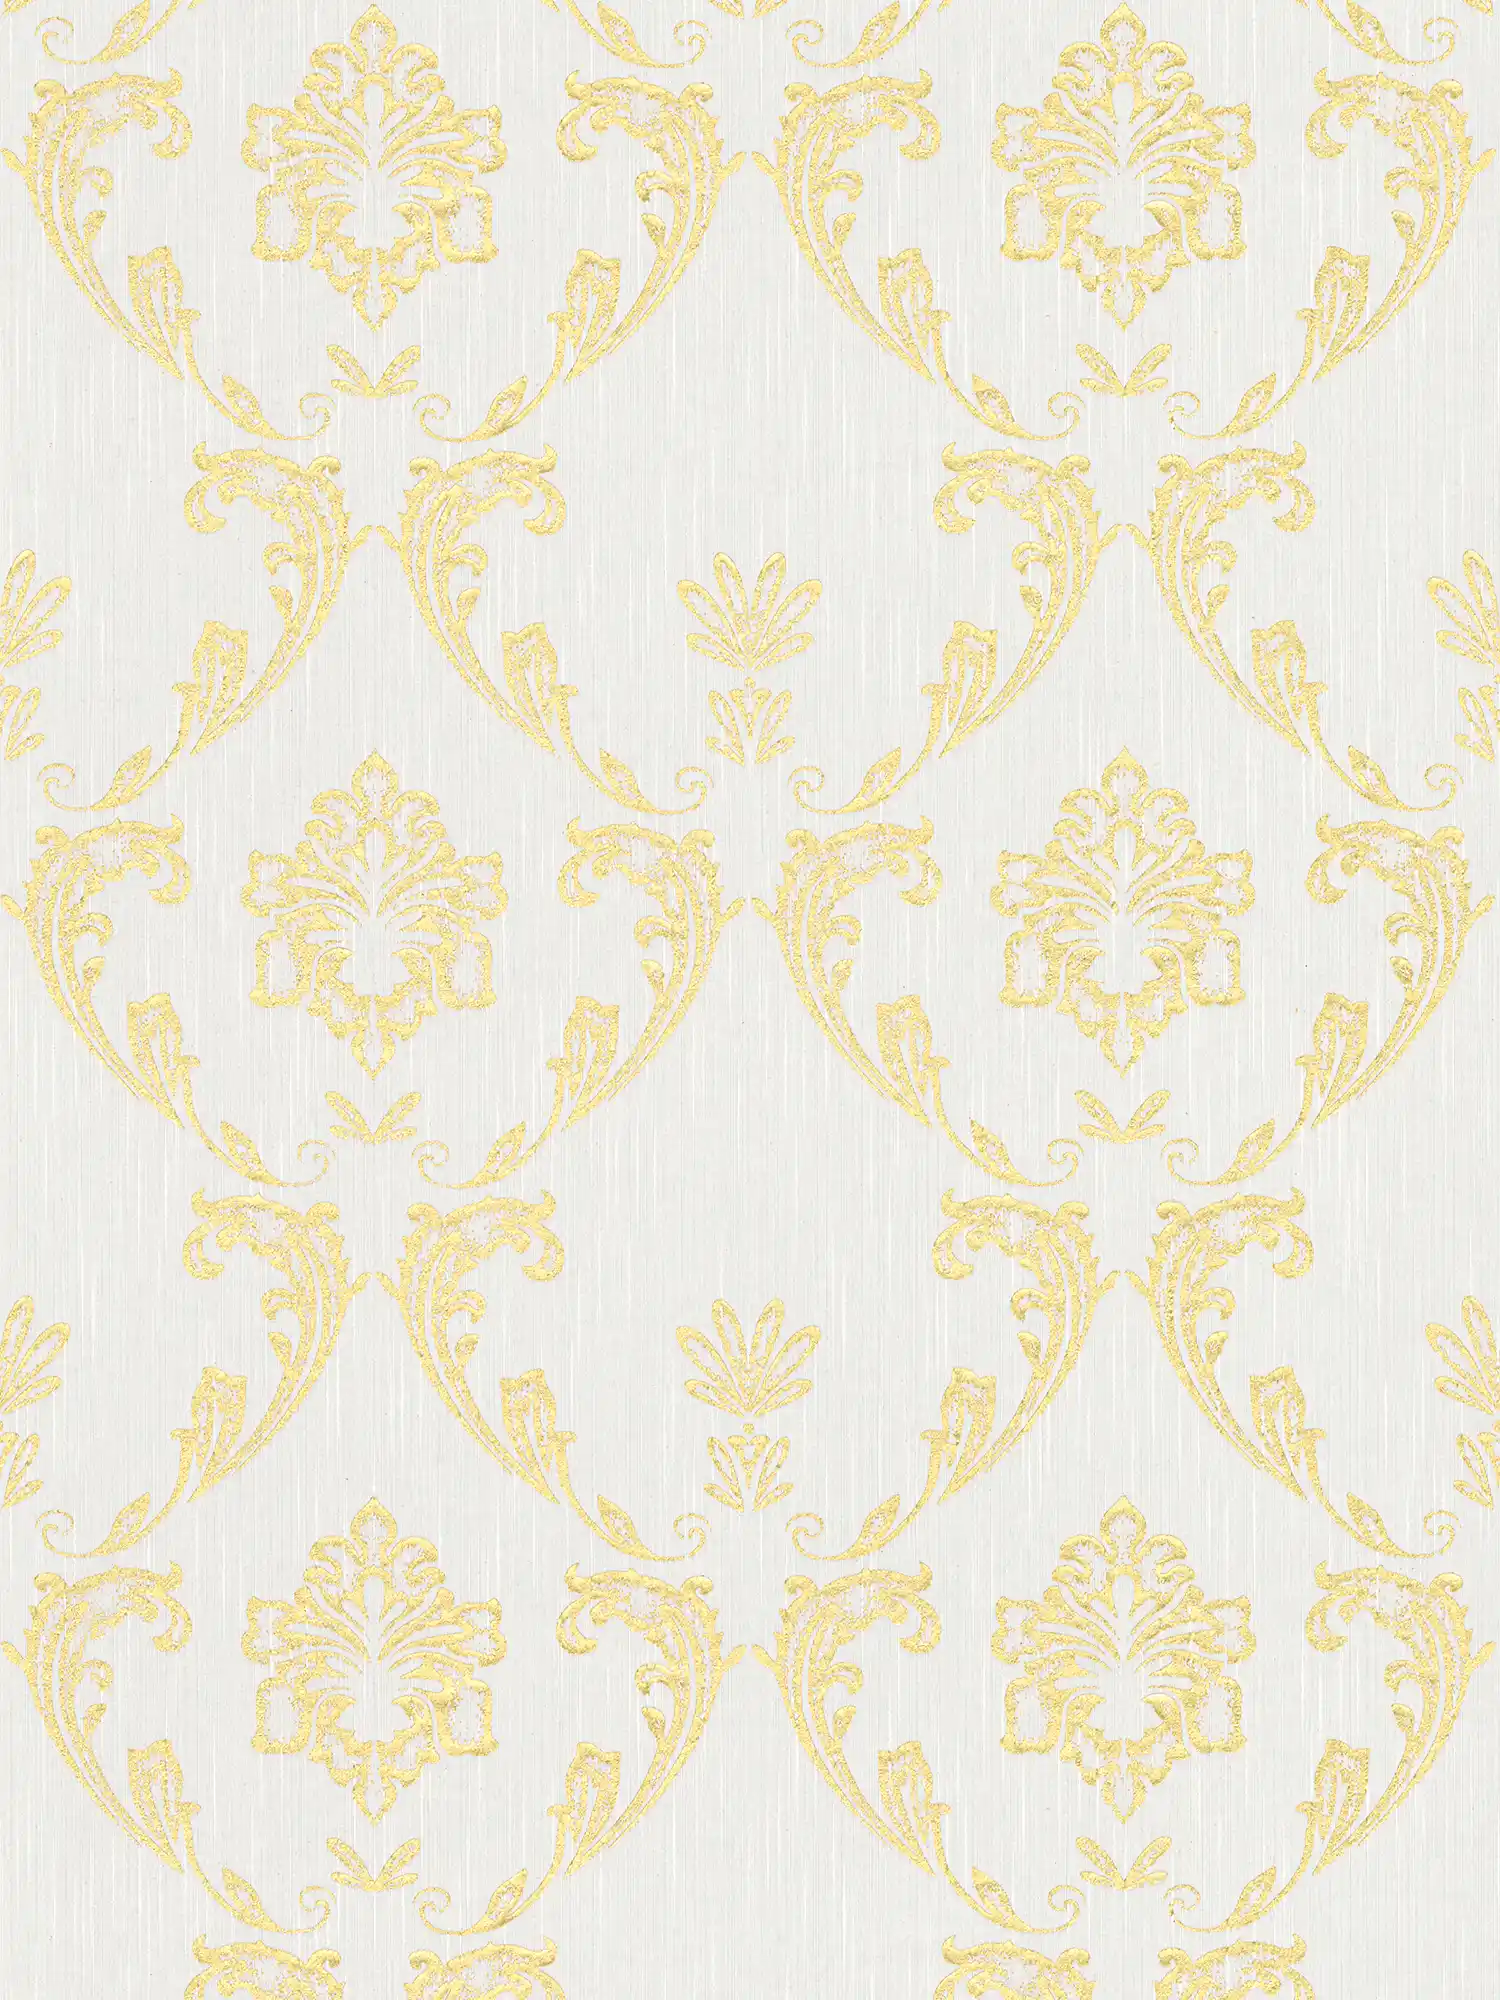 Ornamental wallpaper with floral elements in gold - gold, white
